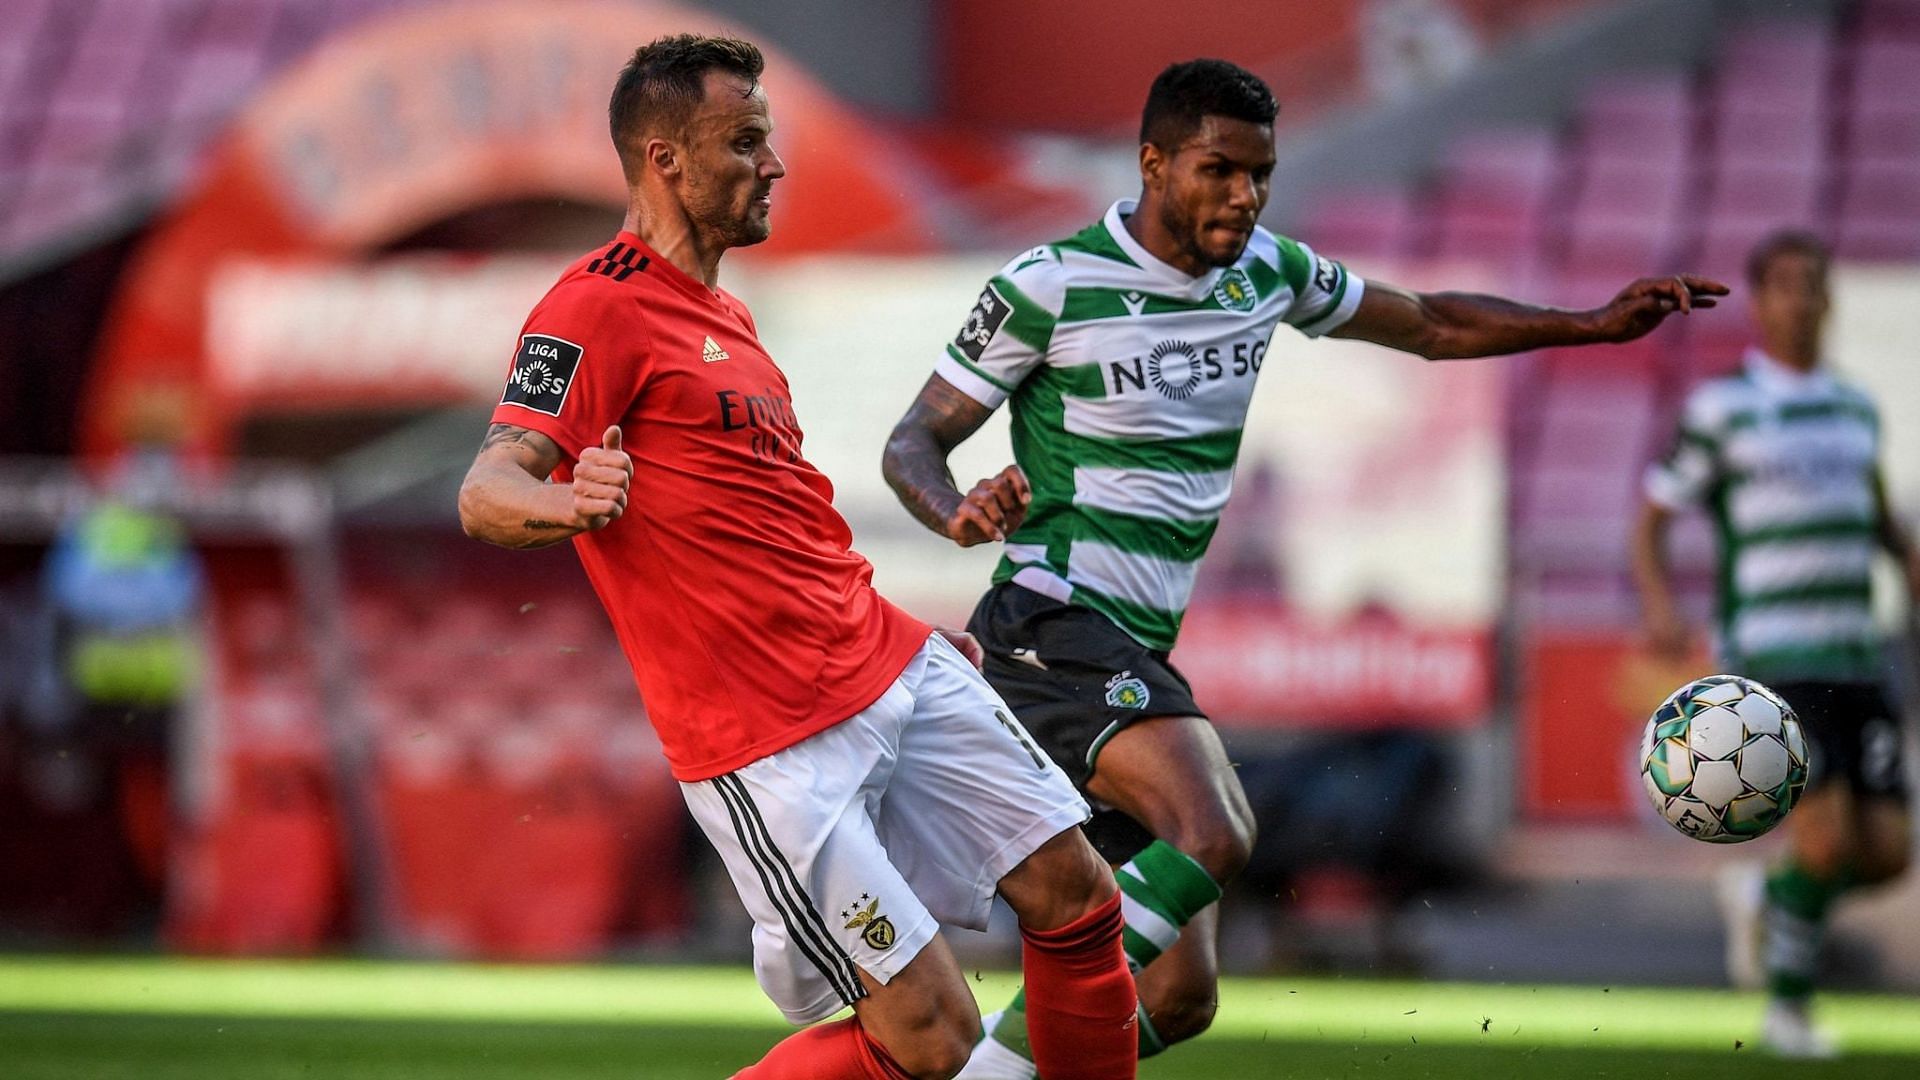 Arch-rivals Benfica and Sporting will lock horns in the Primeira Liga on Sunday